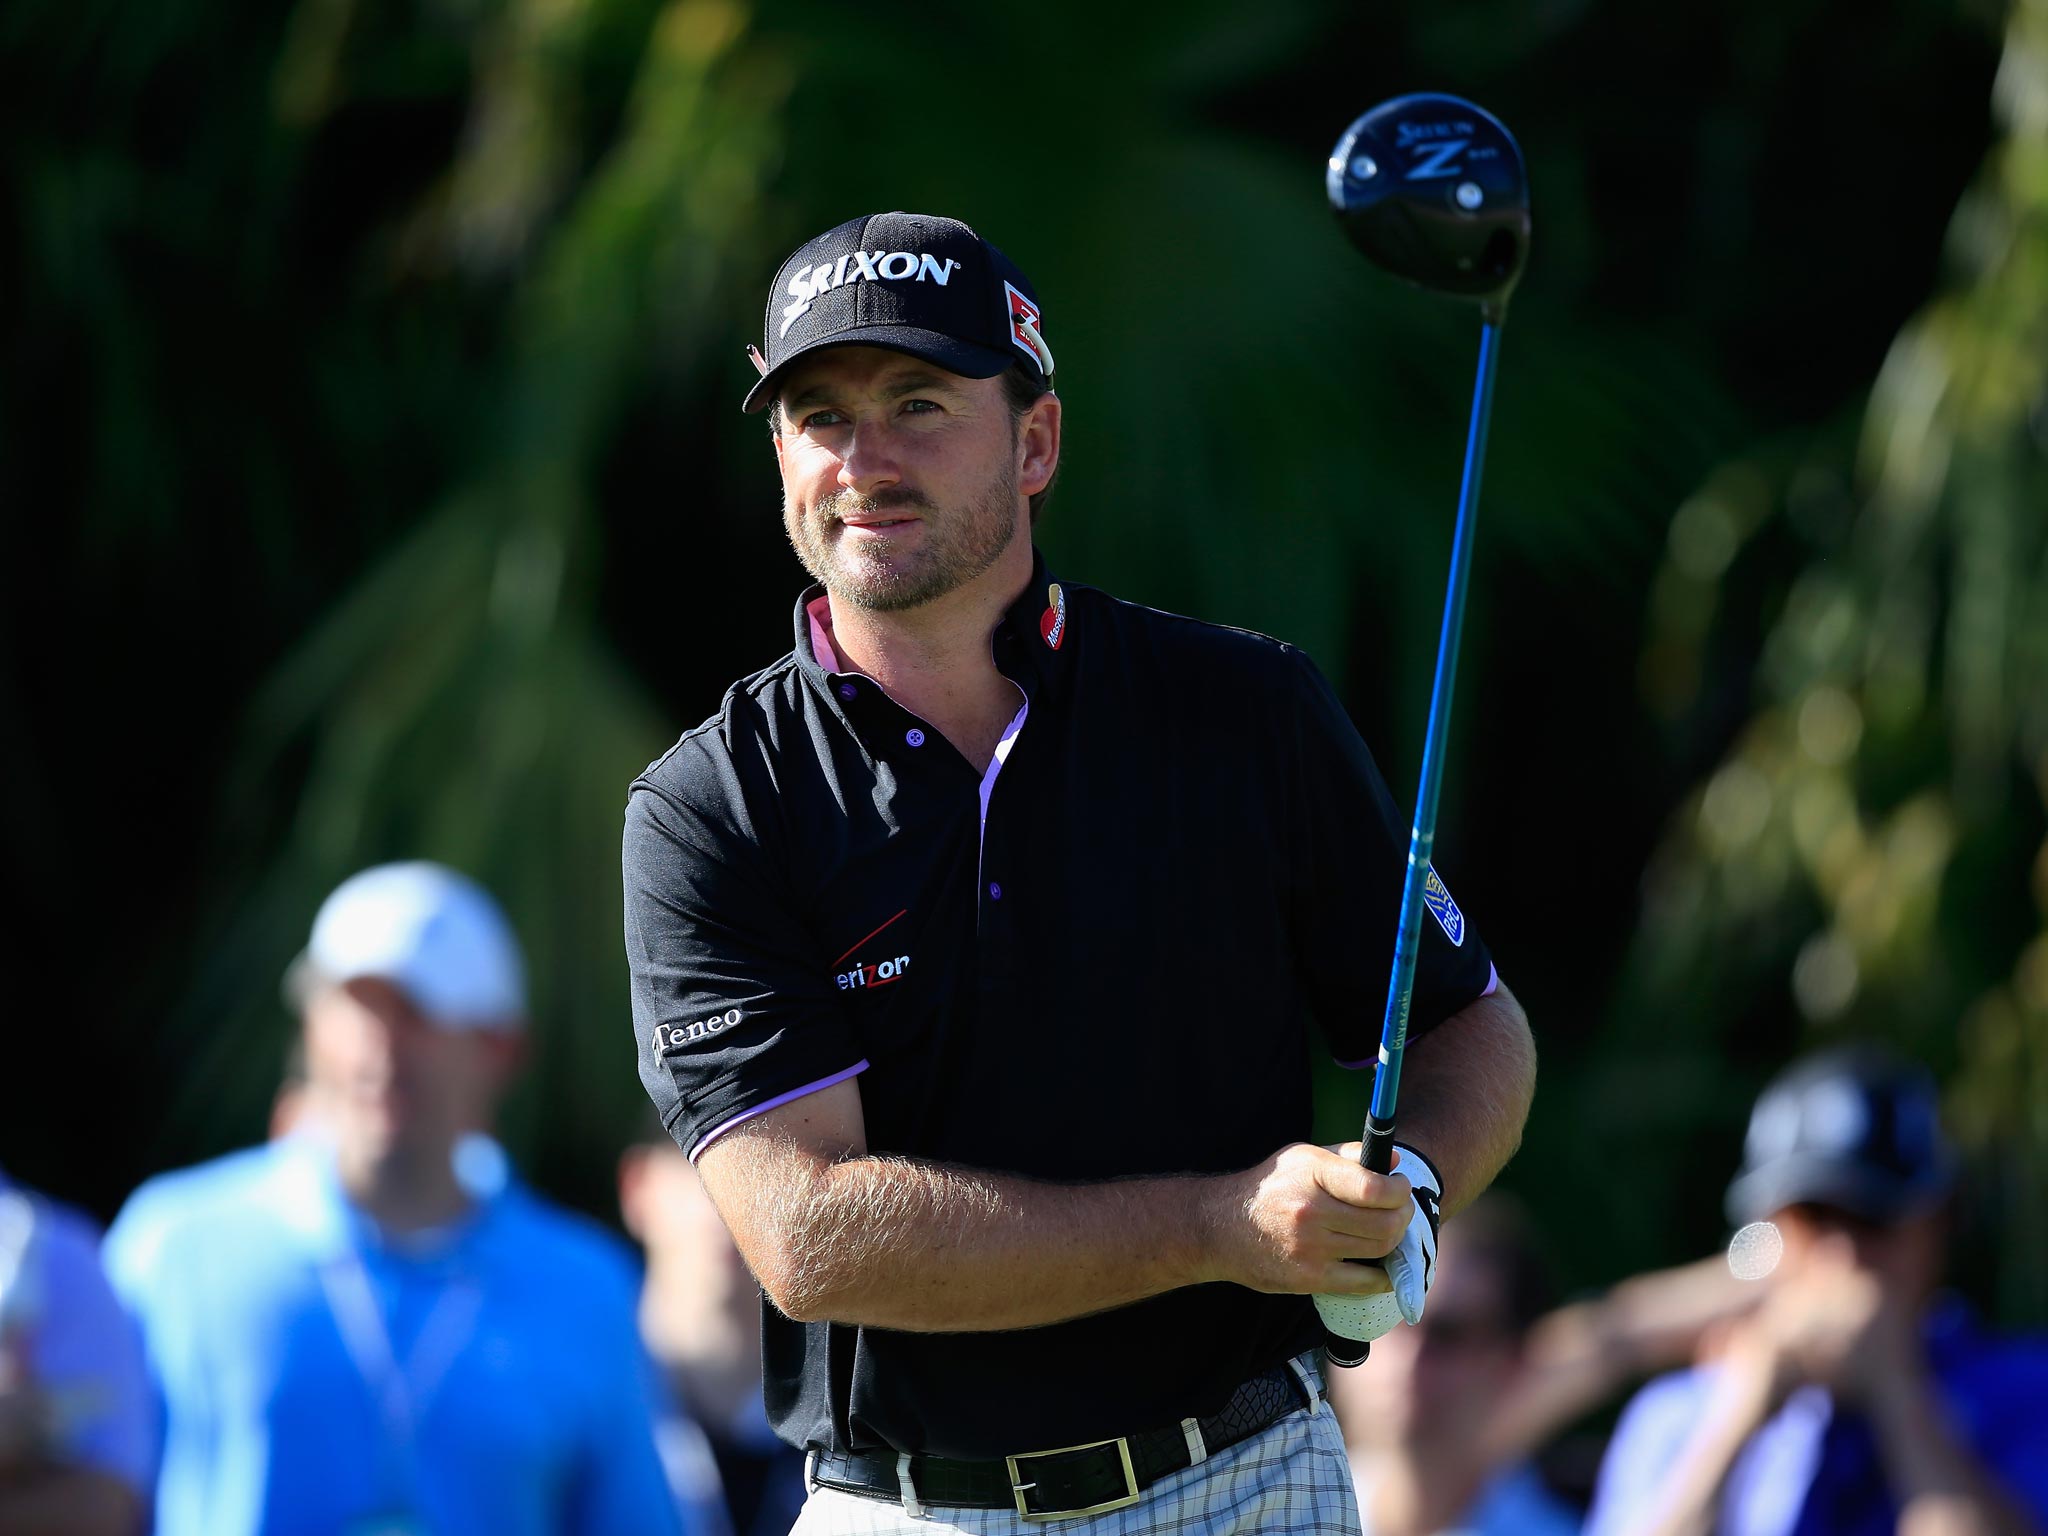 Graeme McDowell took the clubhouse lead with a one-under-par
round of 71